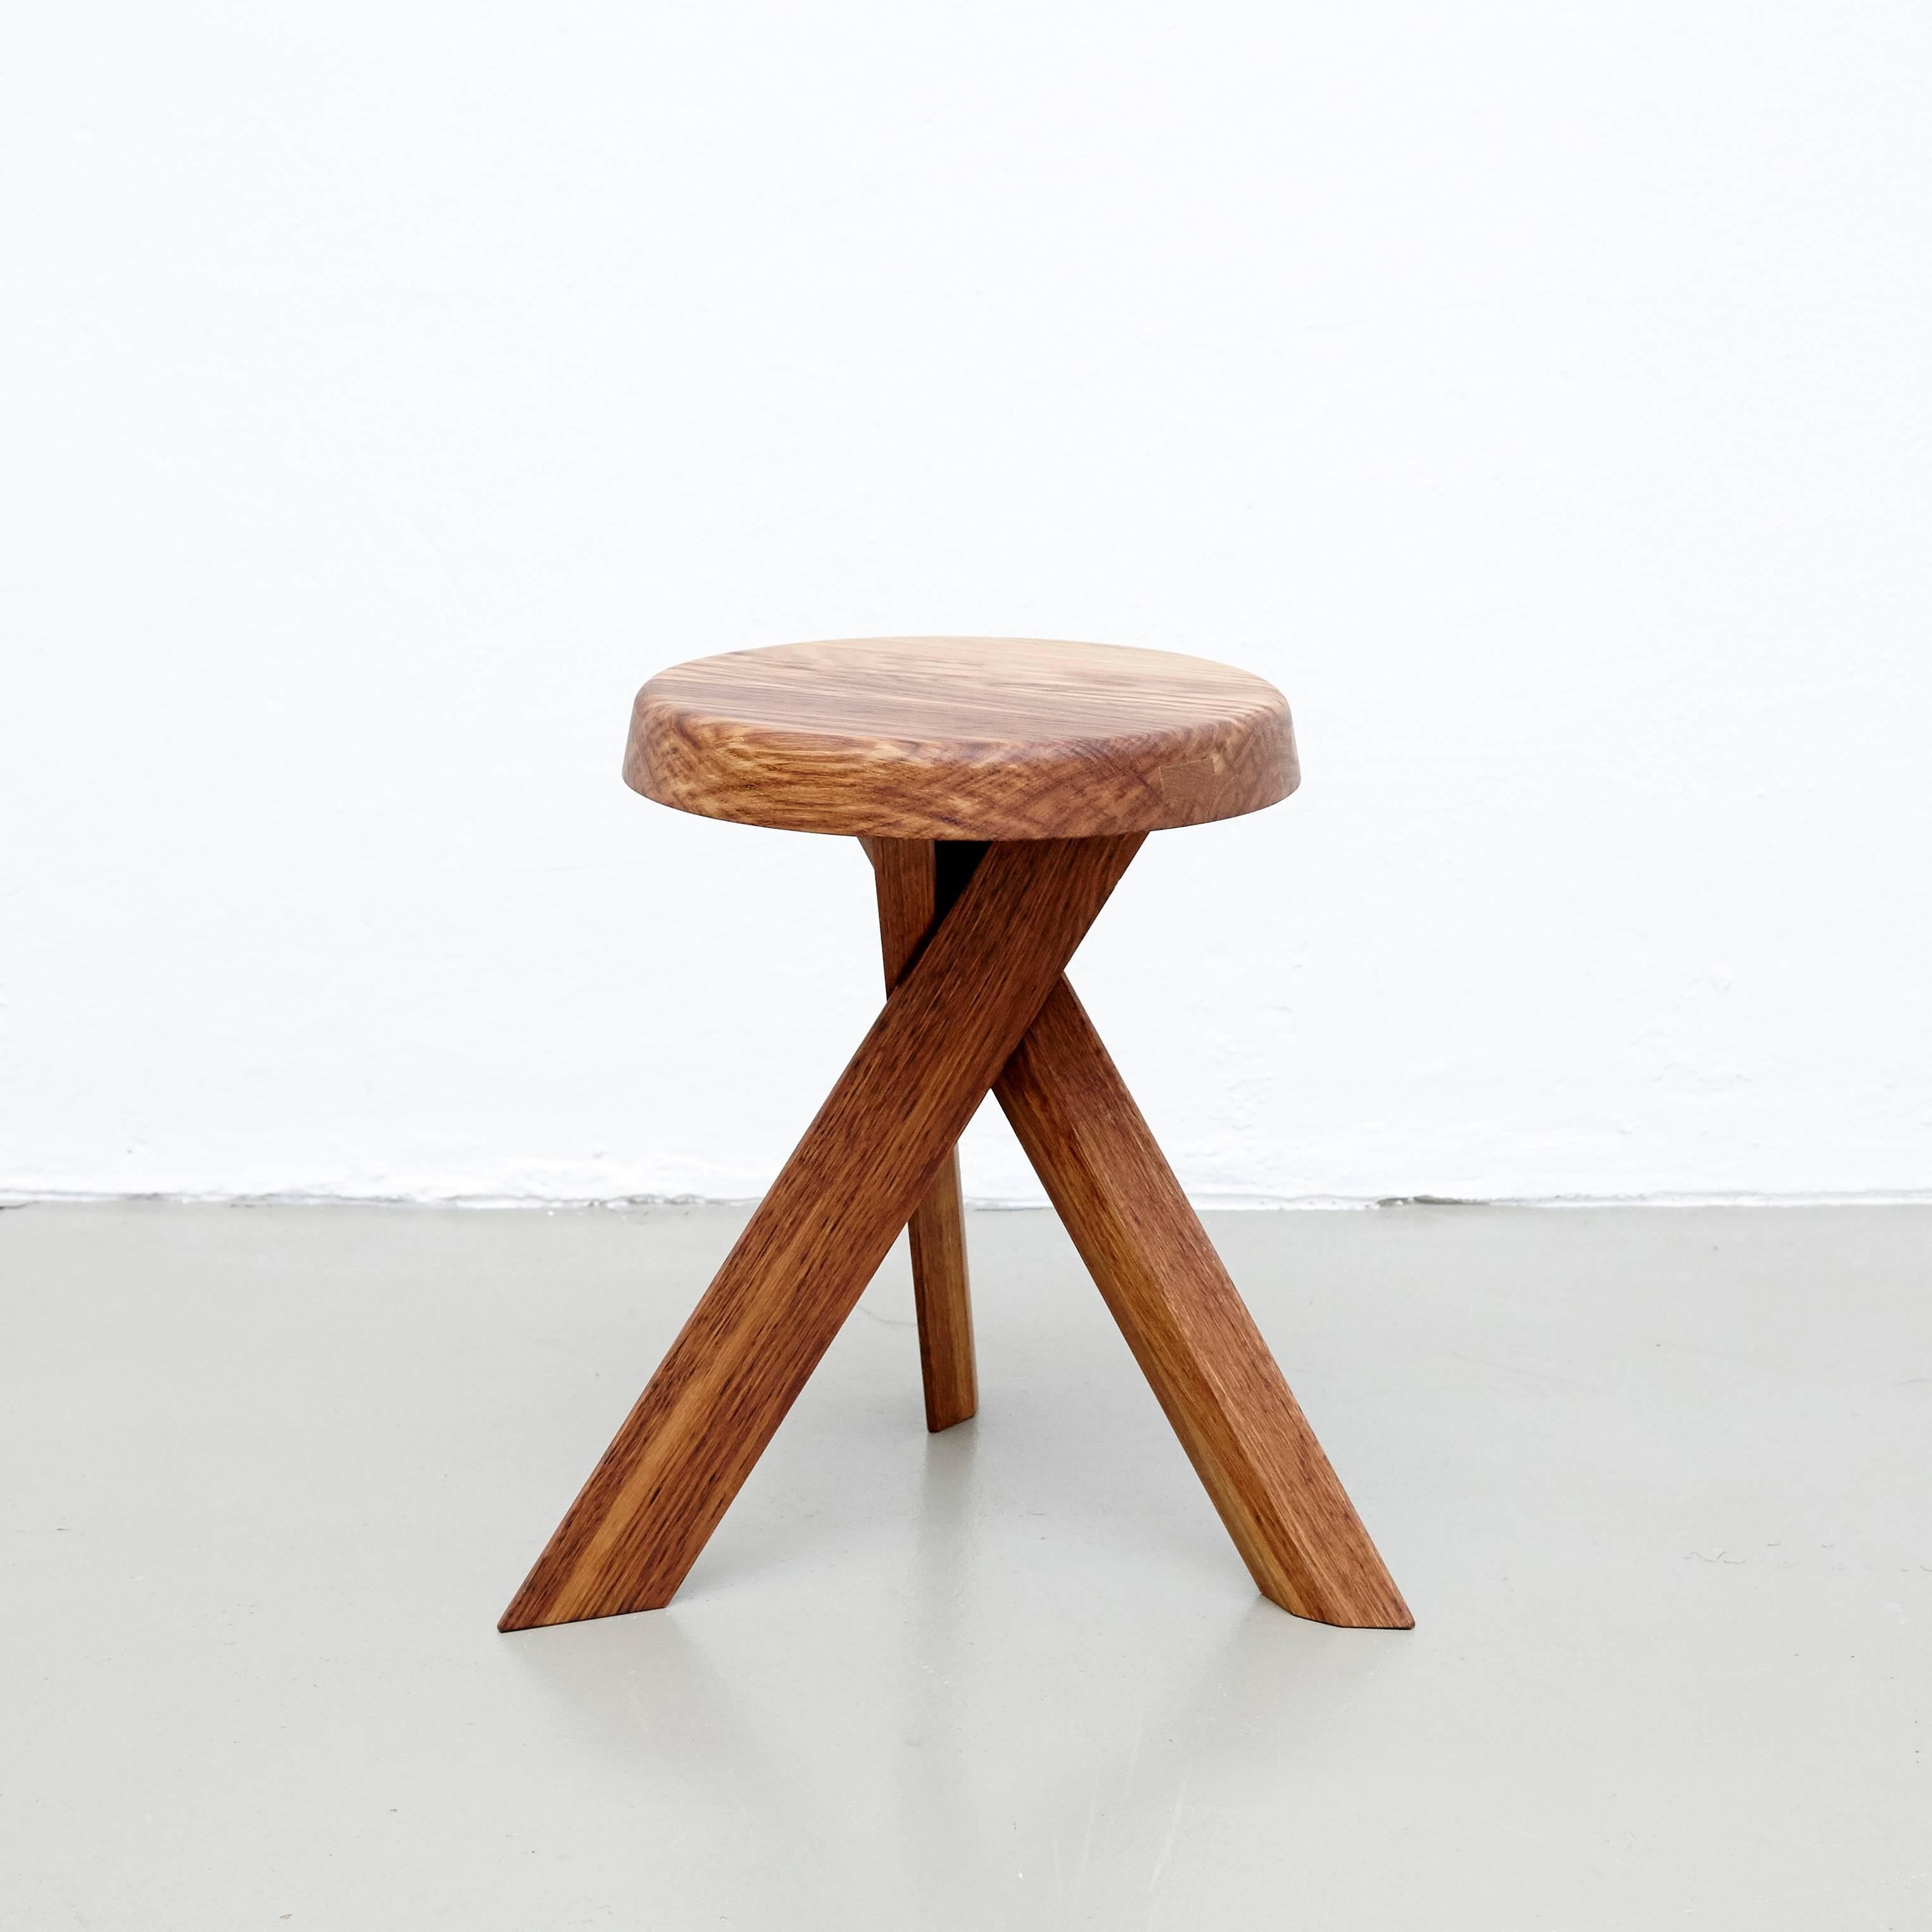 S 31 a stool designed by Pierre Chapo, circa 1960.
Manufactured by Chapo Creation in France, 2015.
Solid oakwood.

In good original condition, with minor wear consistent with age and use, preserving a beautiful patina.

Pierre Chapo is born in